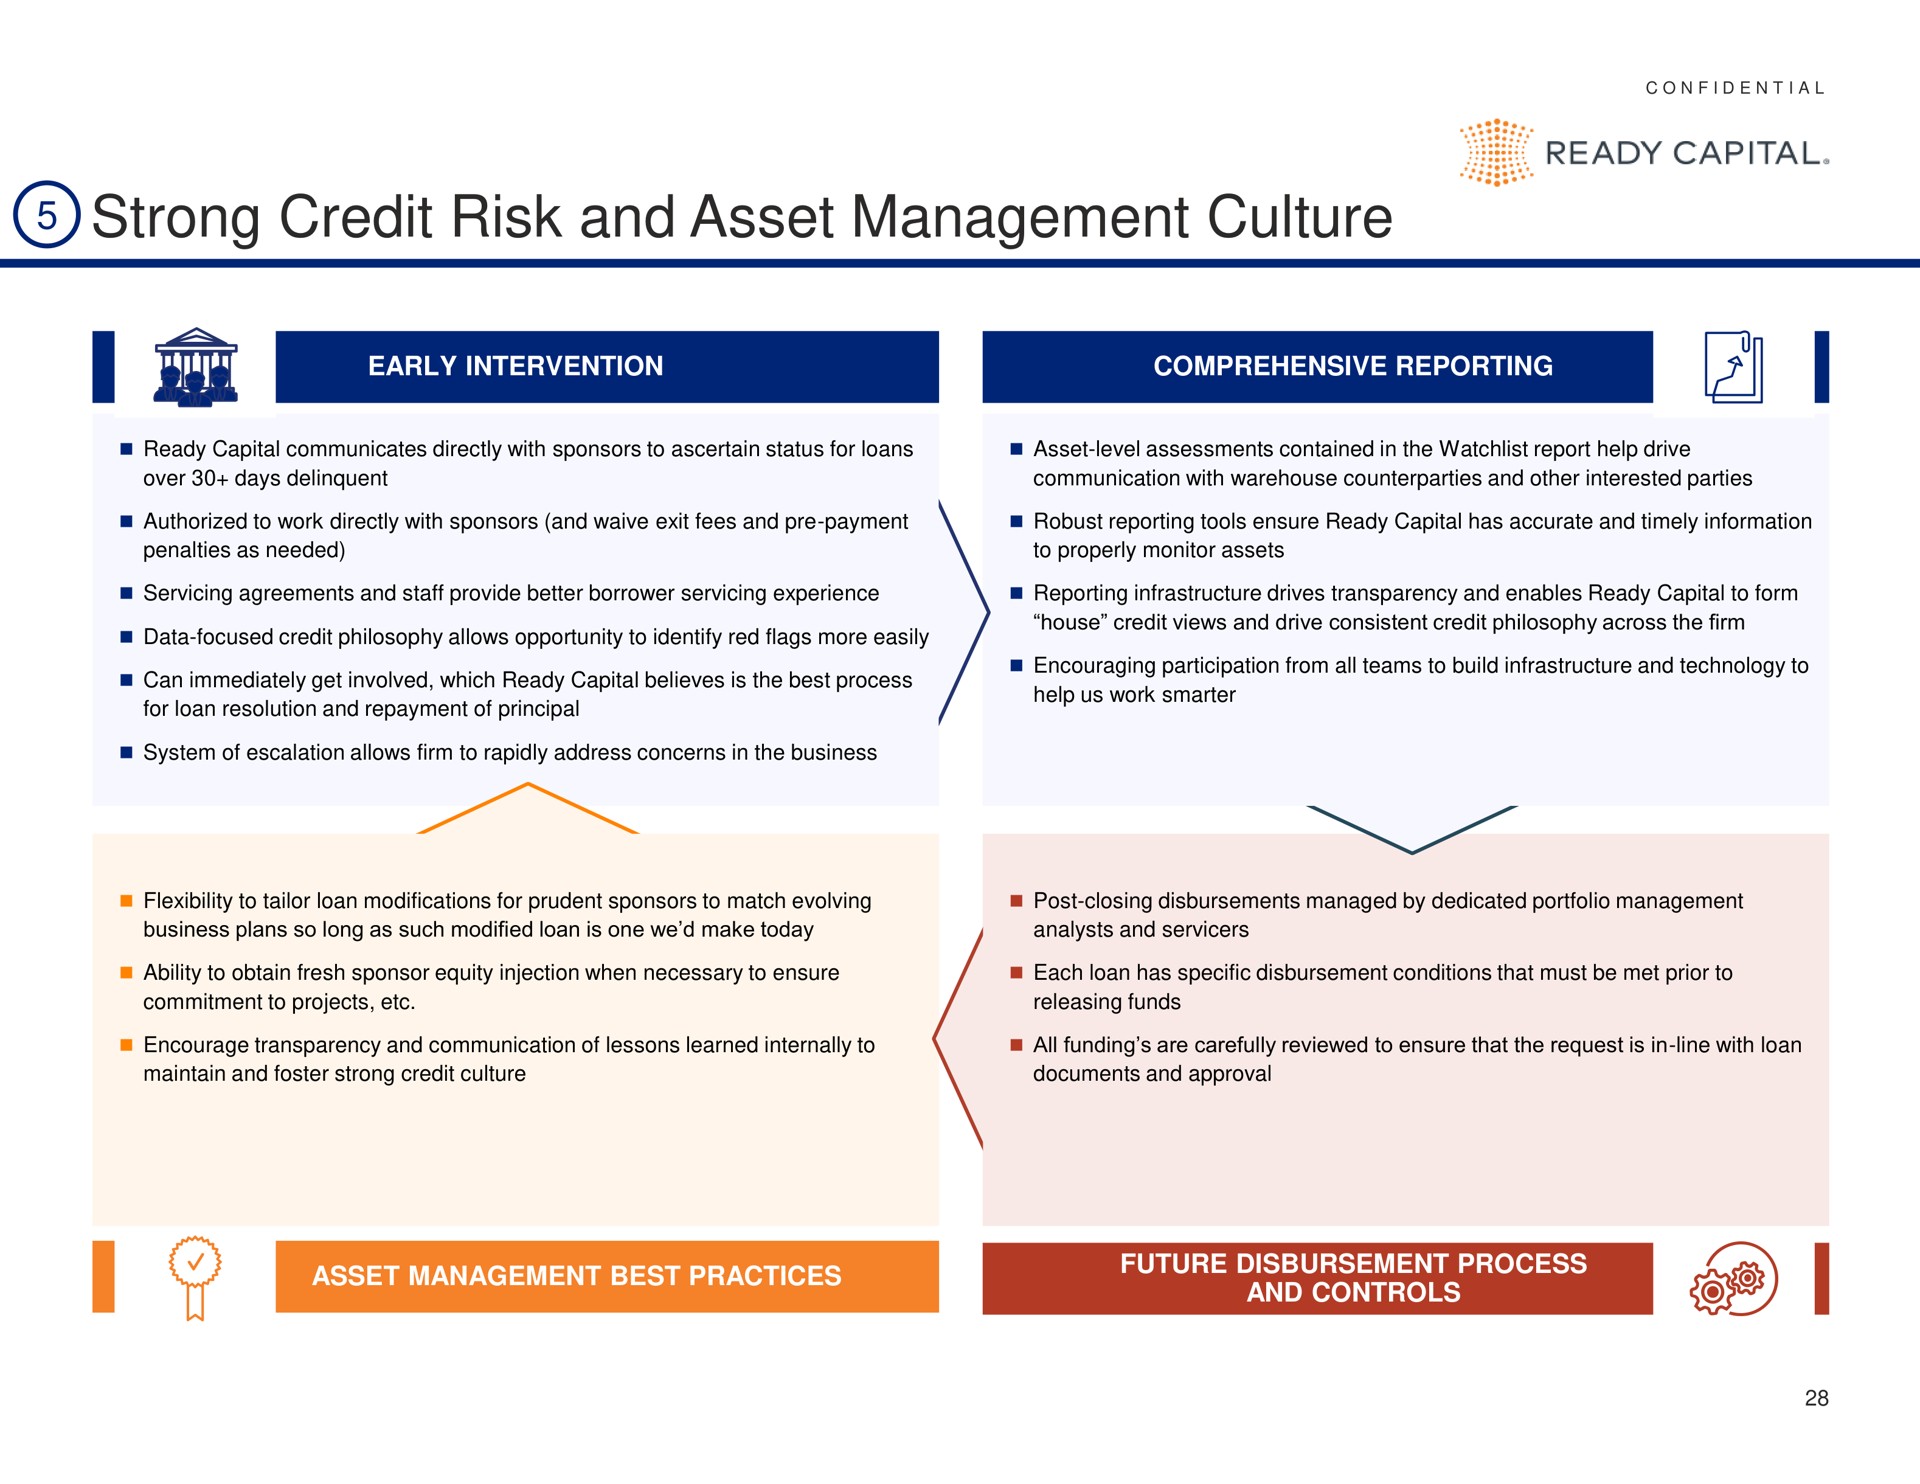 strong credit risk and asset management culture ready capital | Ready Capital